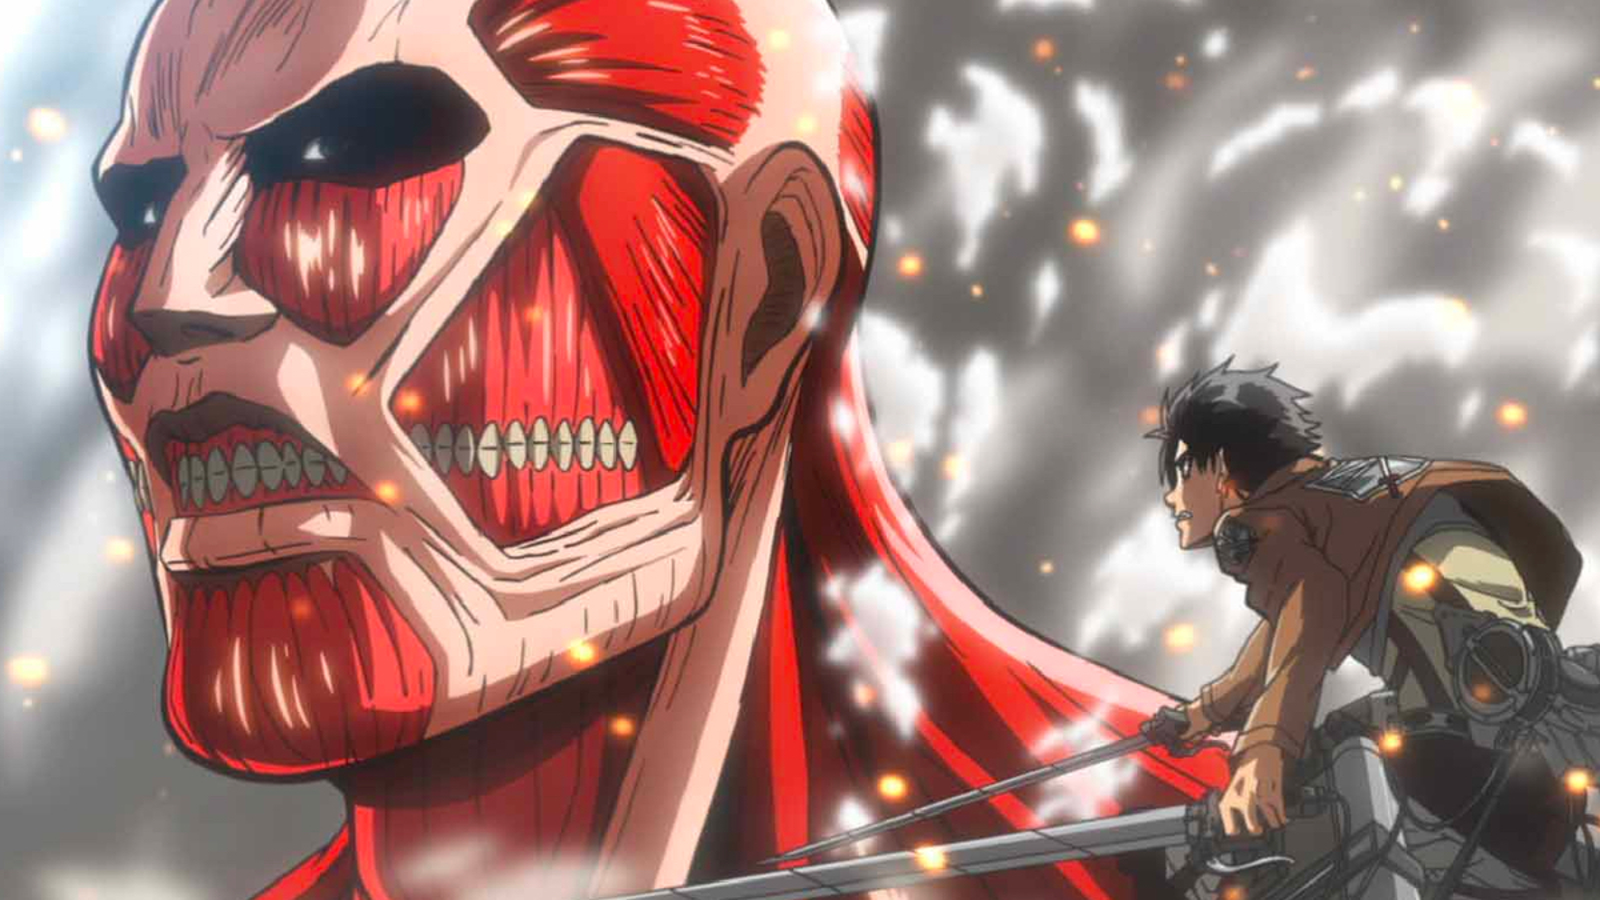 Attack on Titan watch order: How to watch all of the AoT anime in order  (and which order you should watch in!)